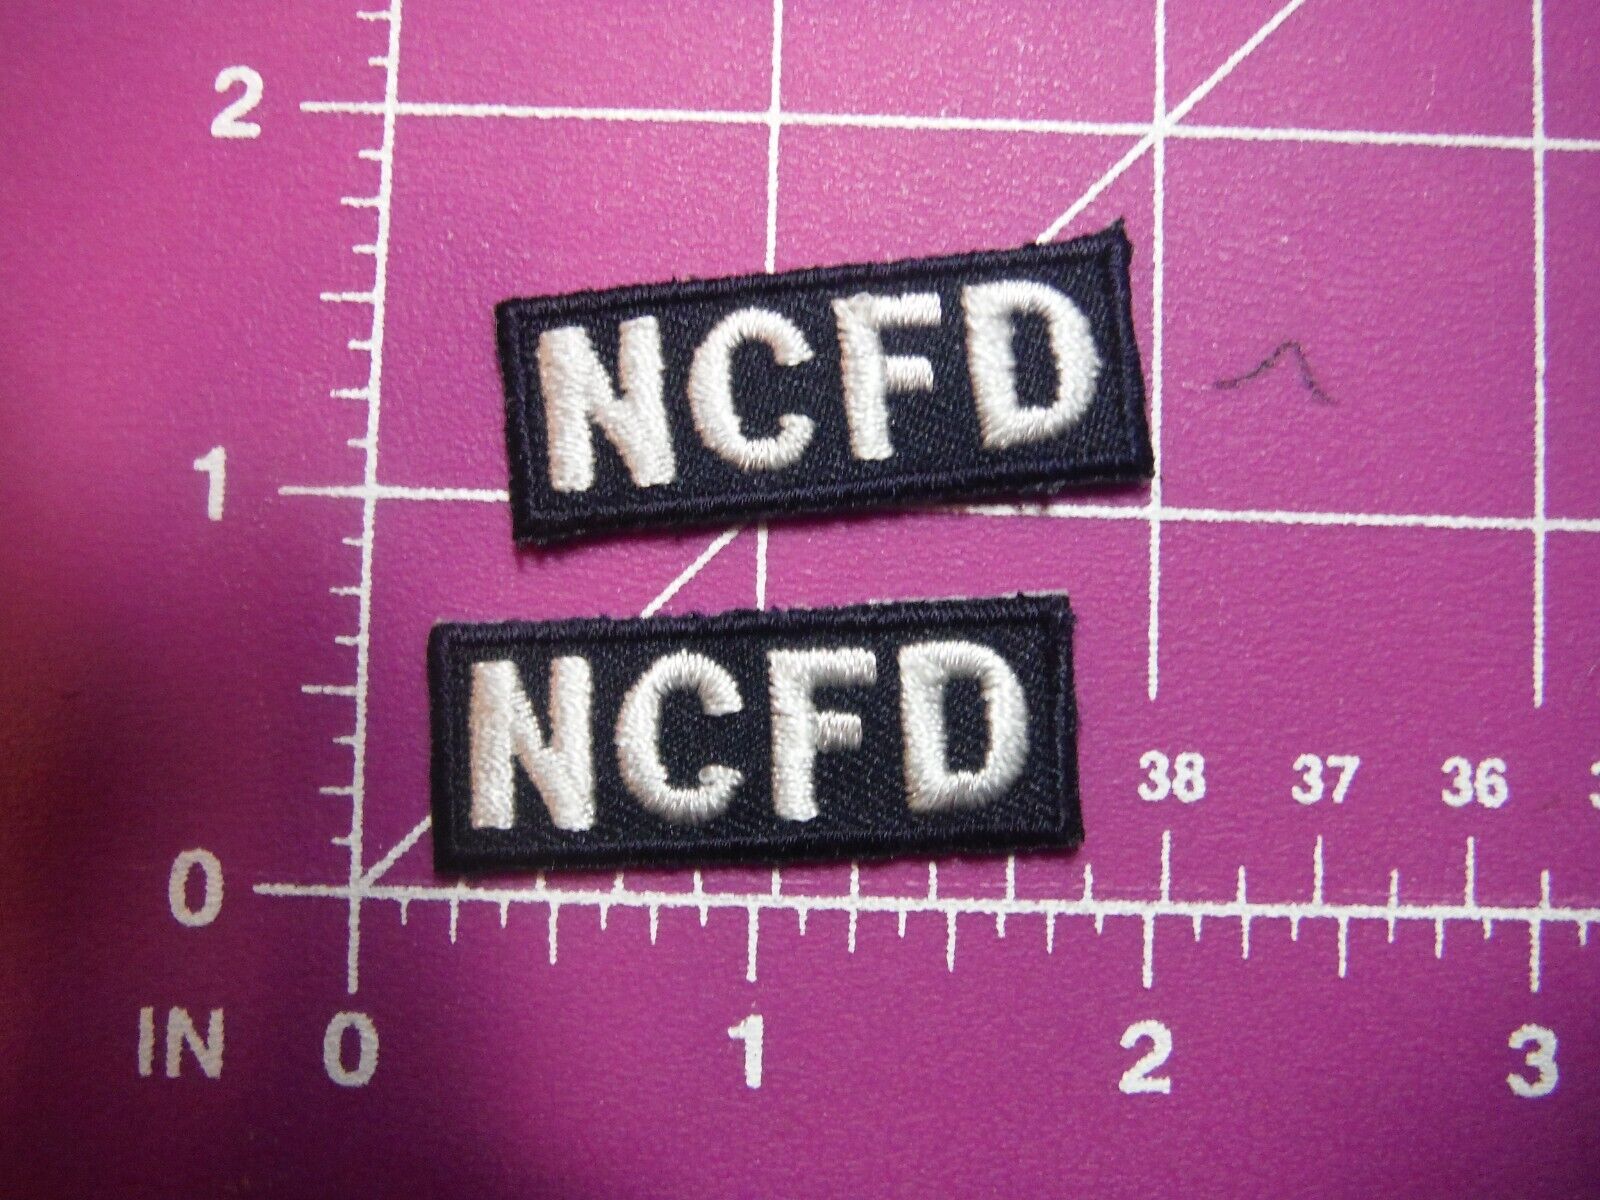 Fire department NCFD collar tab patches